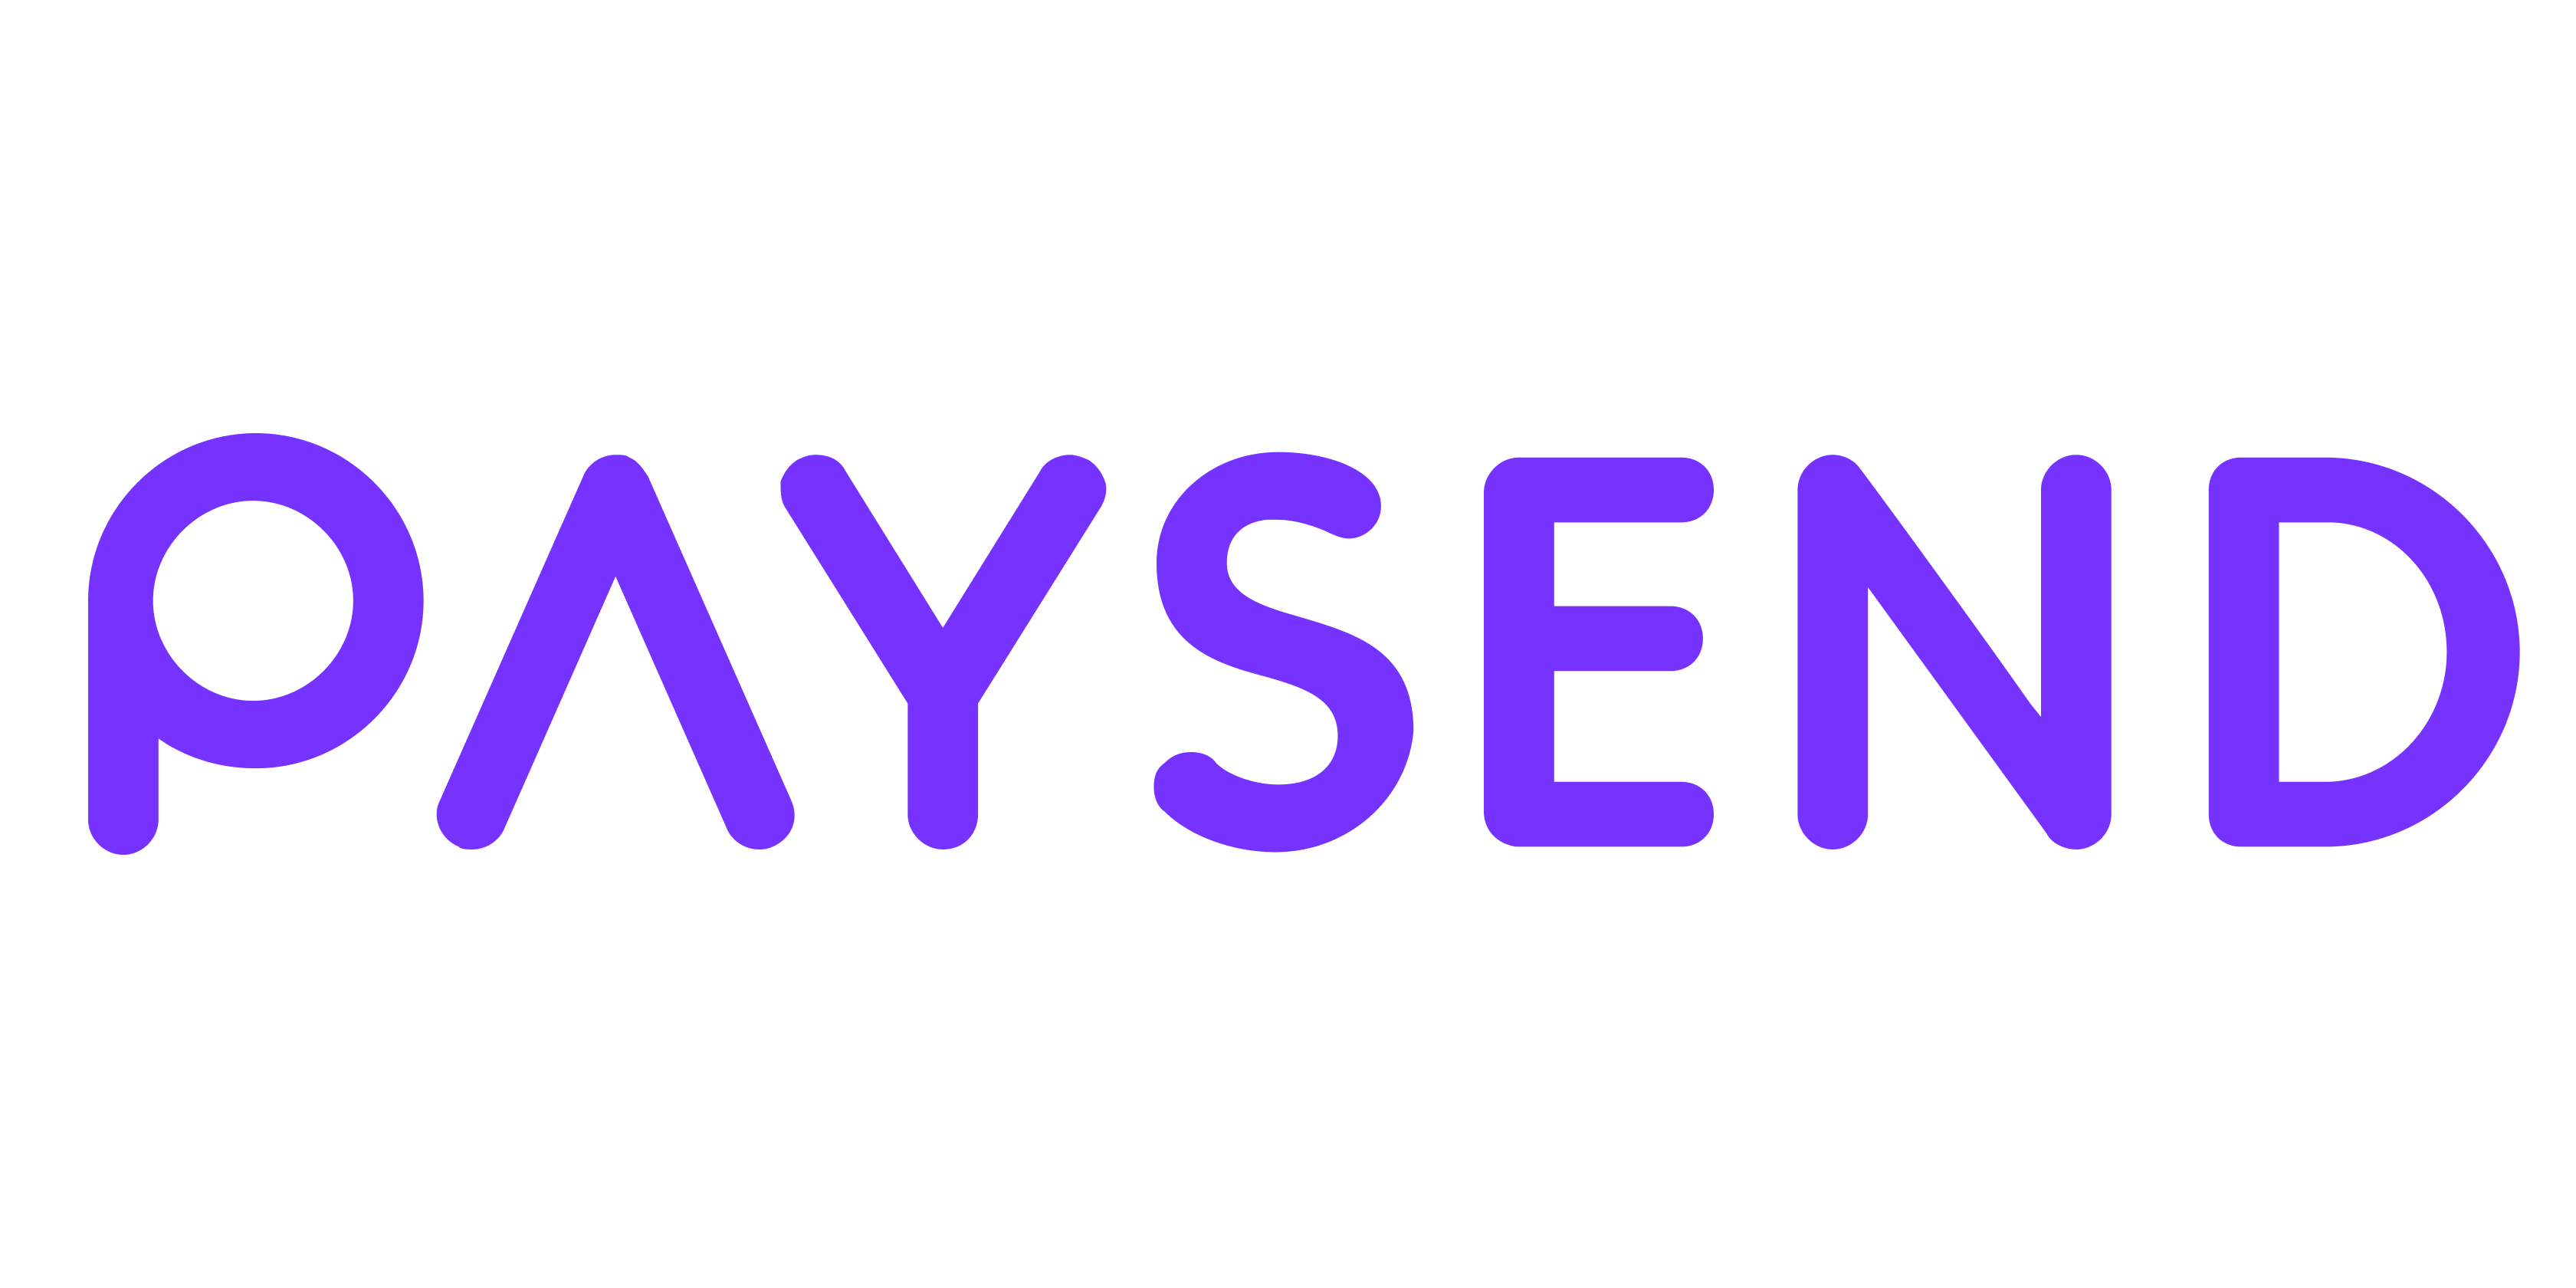 Paysend Further Bolsters Real-time Money Transfer Services for U.S. Customers